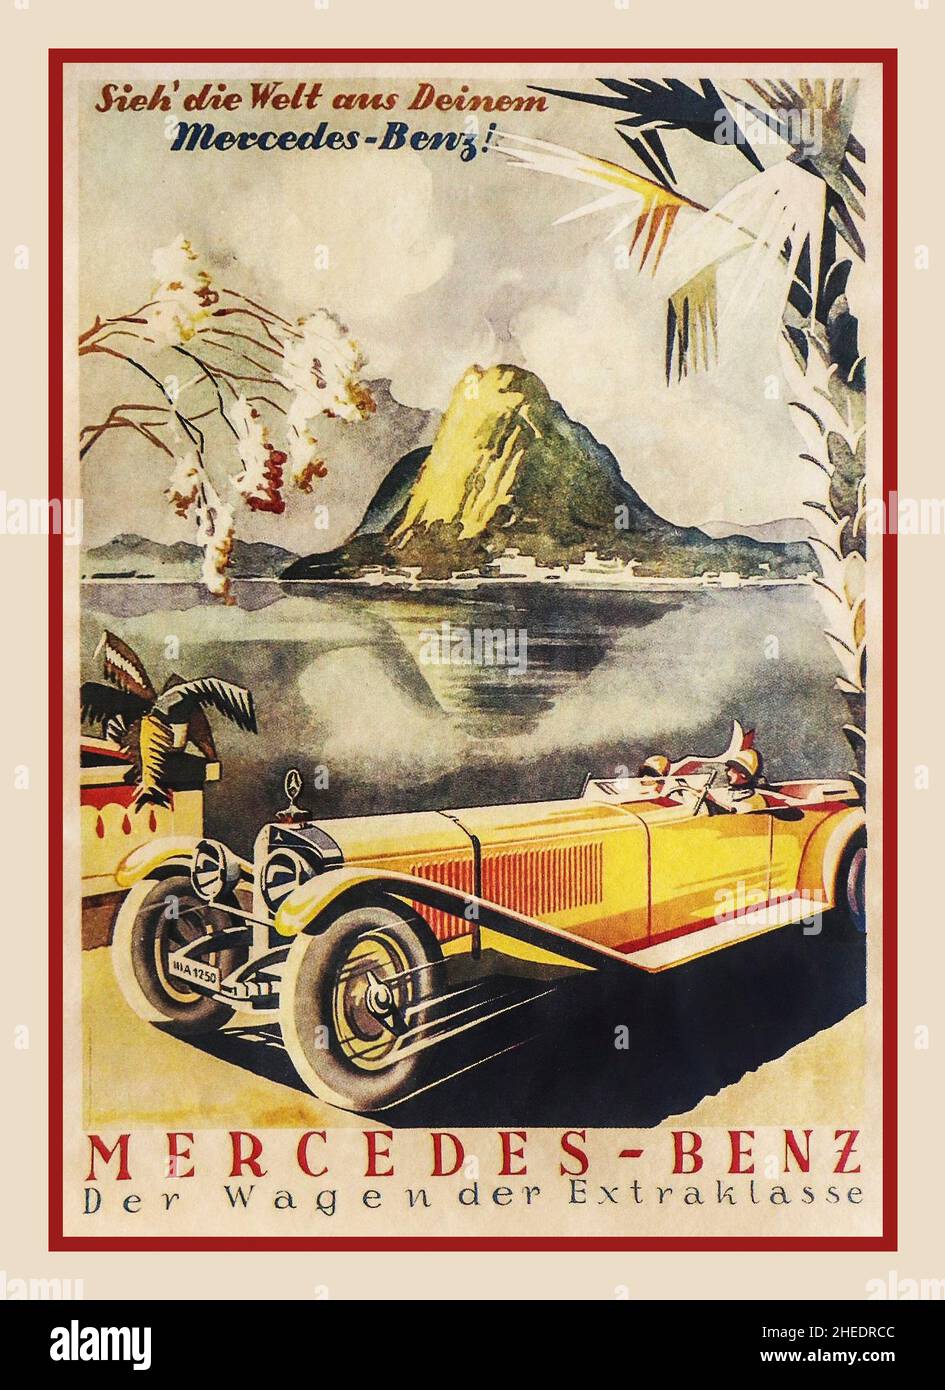 Vintage 1900s Mercedes Advertising Poster 'Sieh' die Welt aus Deinem' Mercedes Benz ! 'MERCEDES-BENZ Der Wagen der Extraklasse'      'See' the world from your 'Mercedes Benz!  'MERCEDES-BENZ The car in a class of its own' Stock Photo